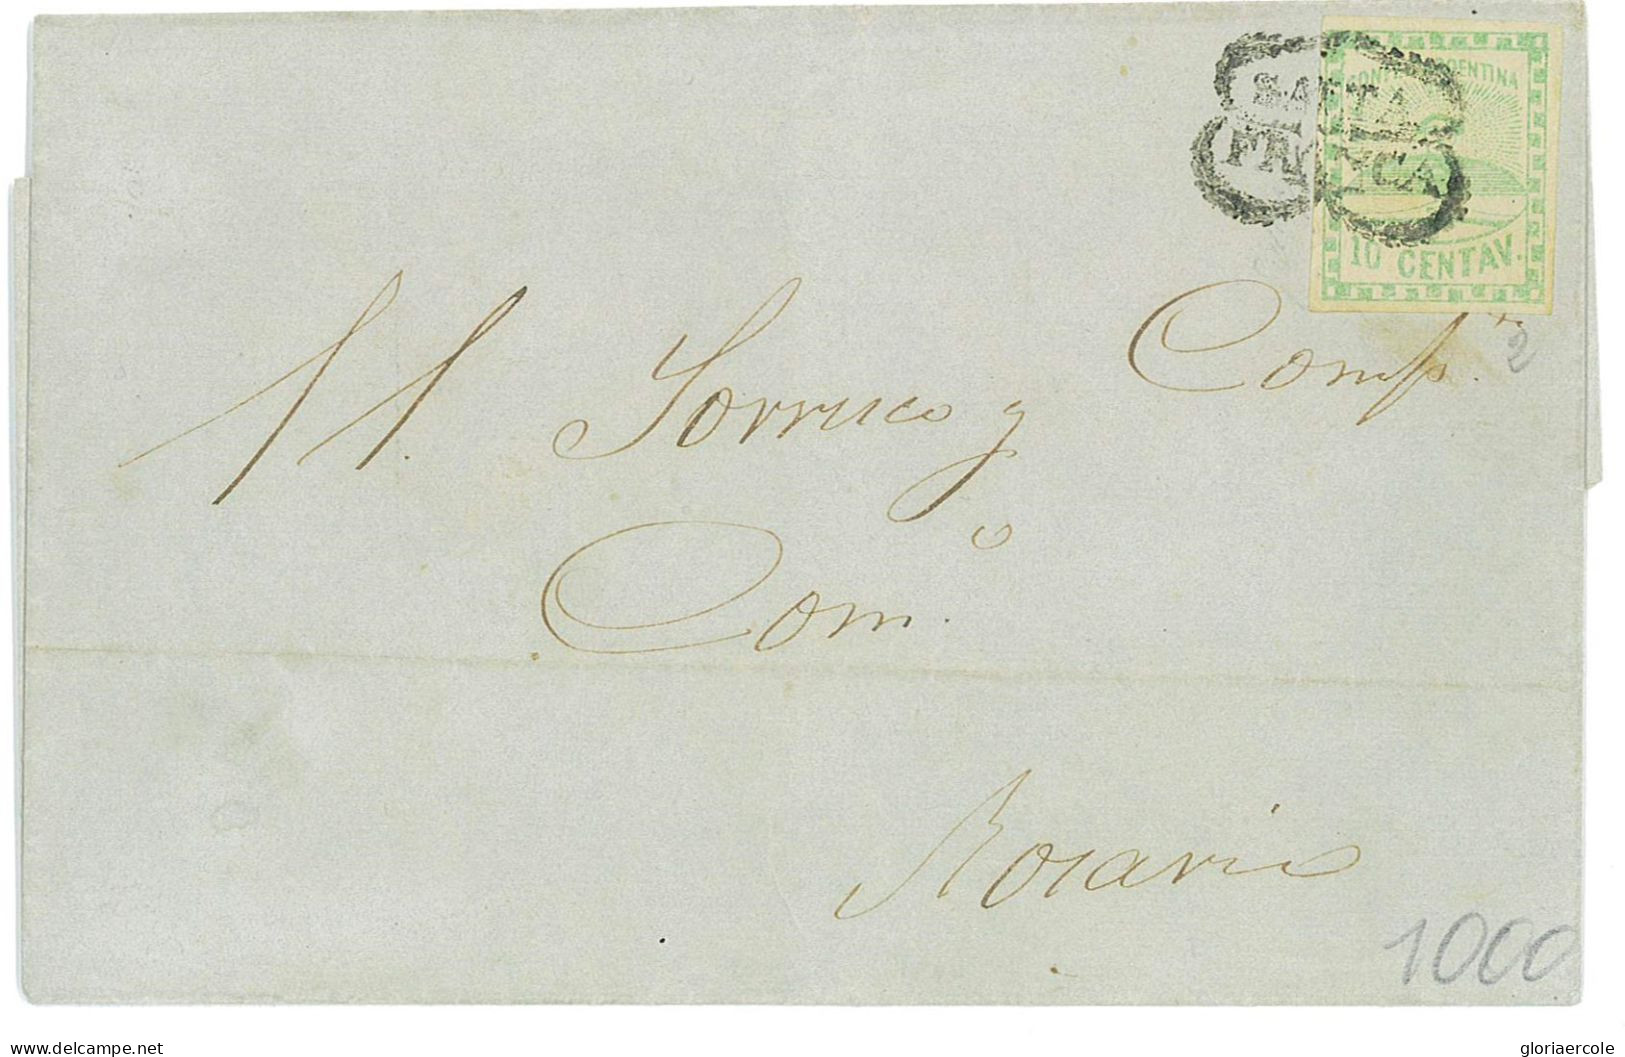 P2848 - CONFEDERACION ARGENTINA, G.J. CAT. NR. 2 FROM SALTA TO ROSARIO 1858 - Covers & Documents